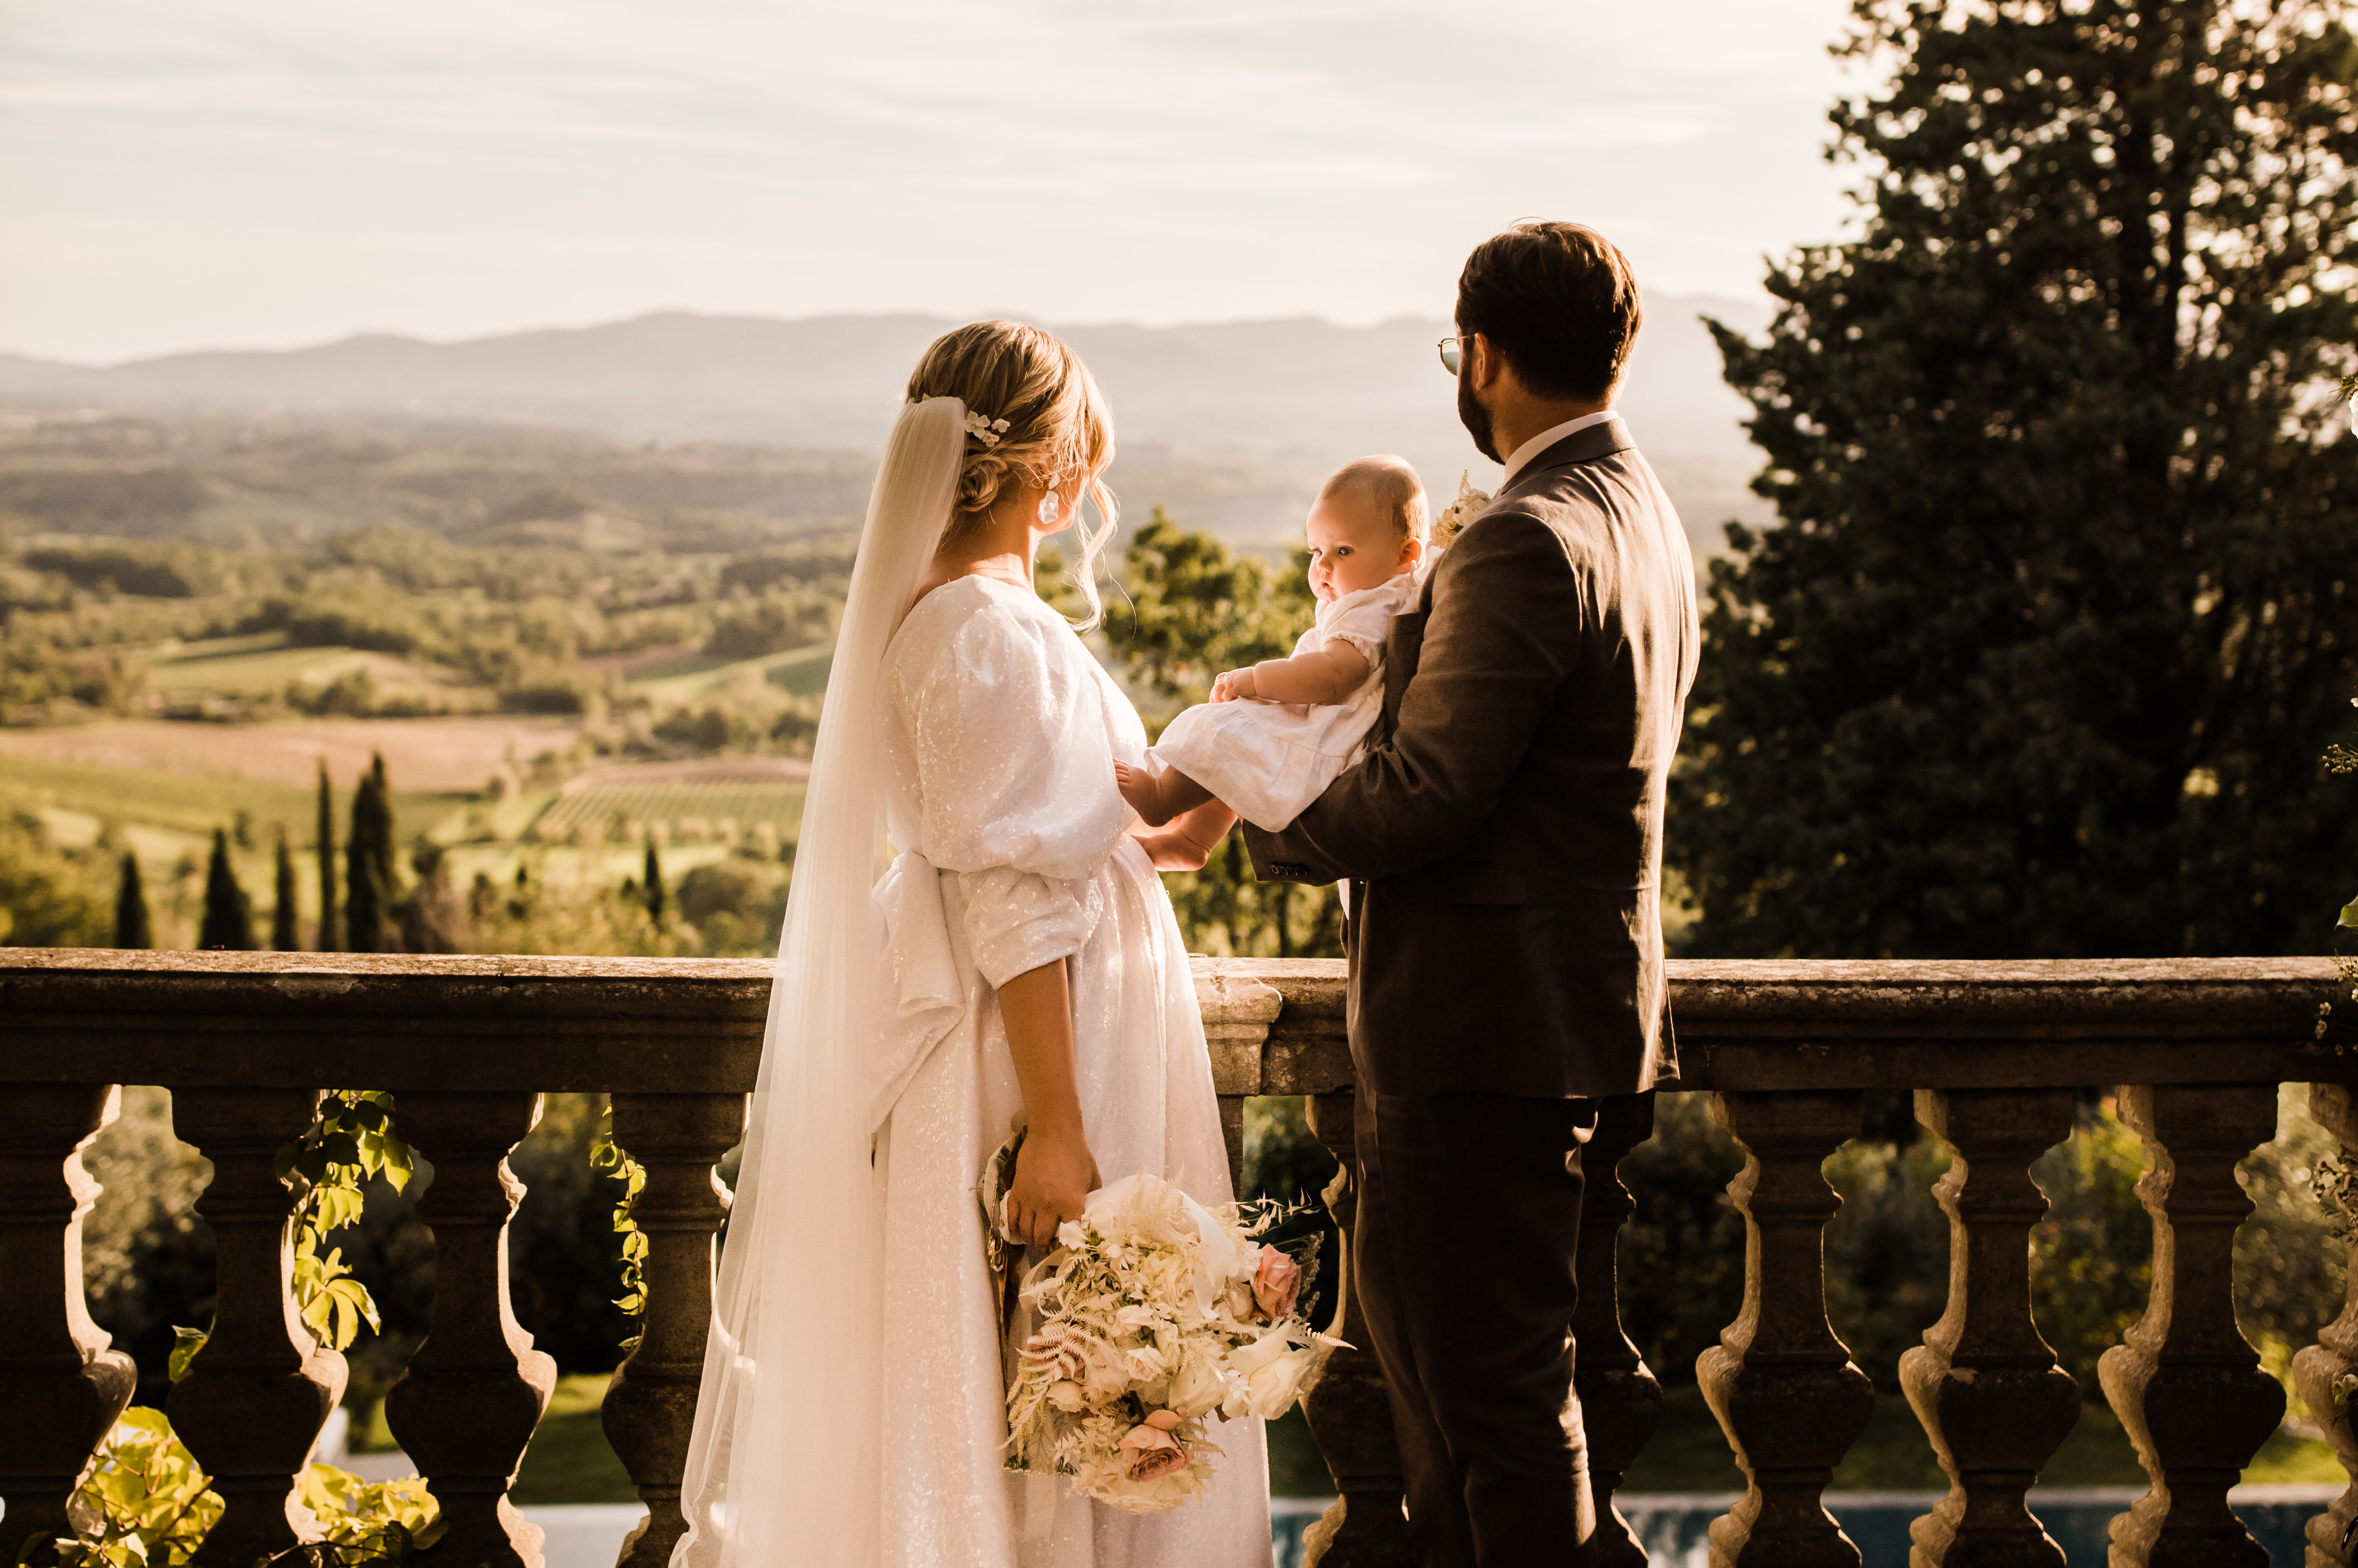 Eve and Patrick, a chateau wedding in Tuscany